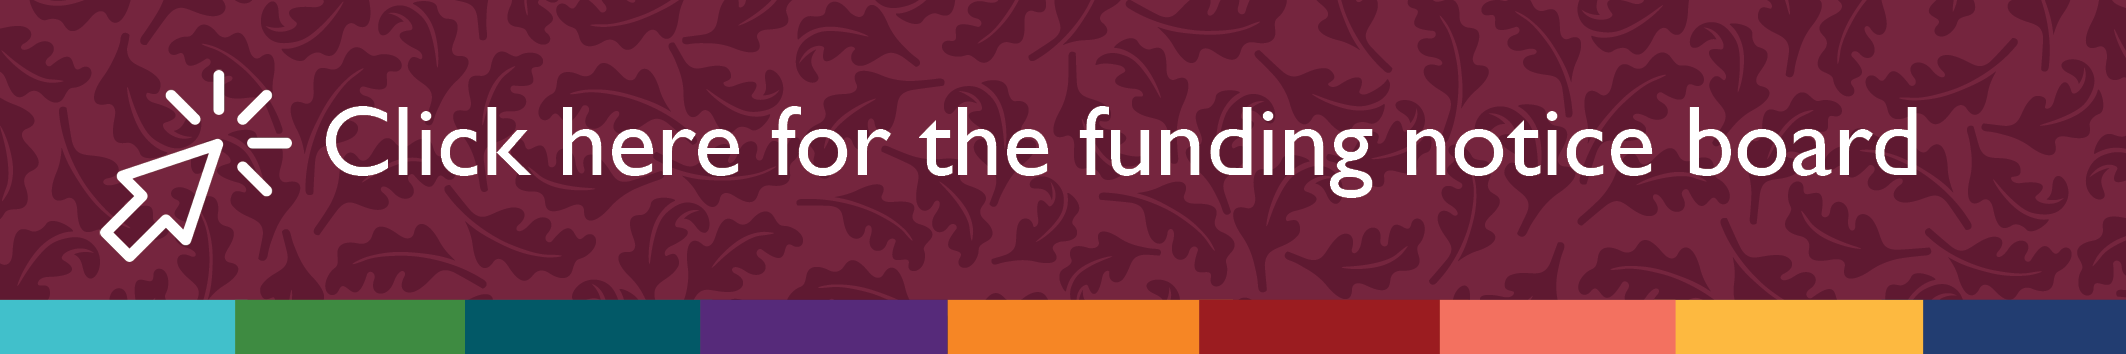 Click here for funding announcements  2021 banner.png